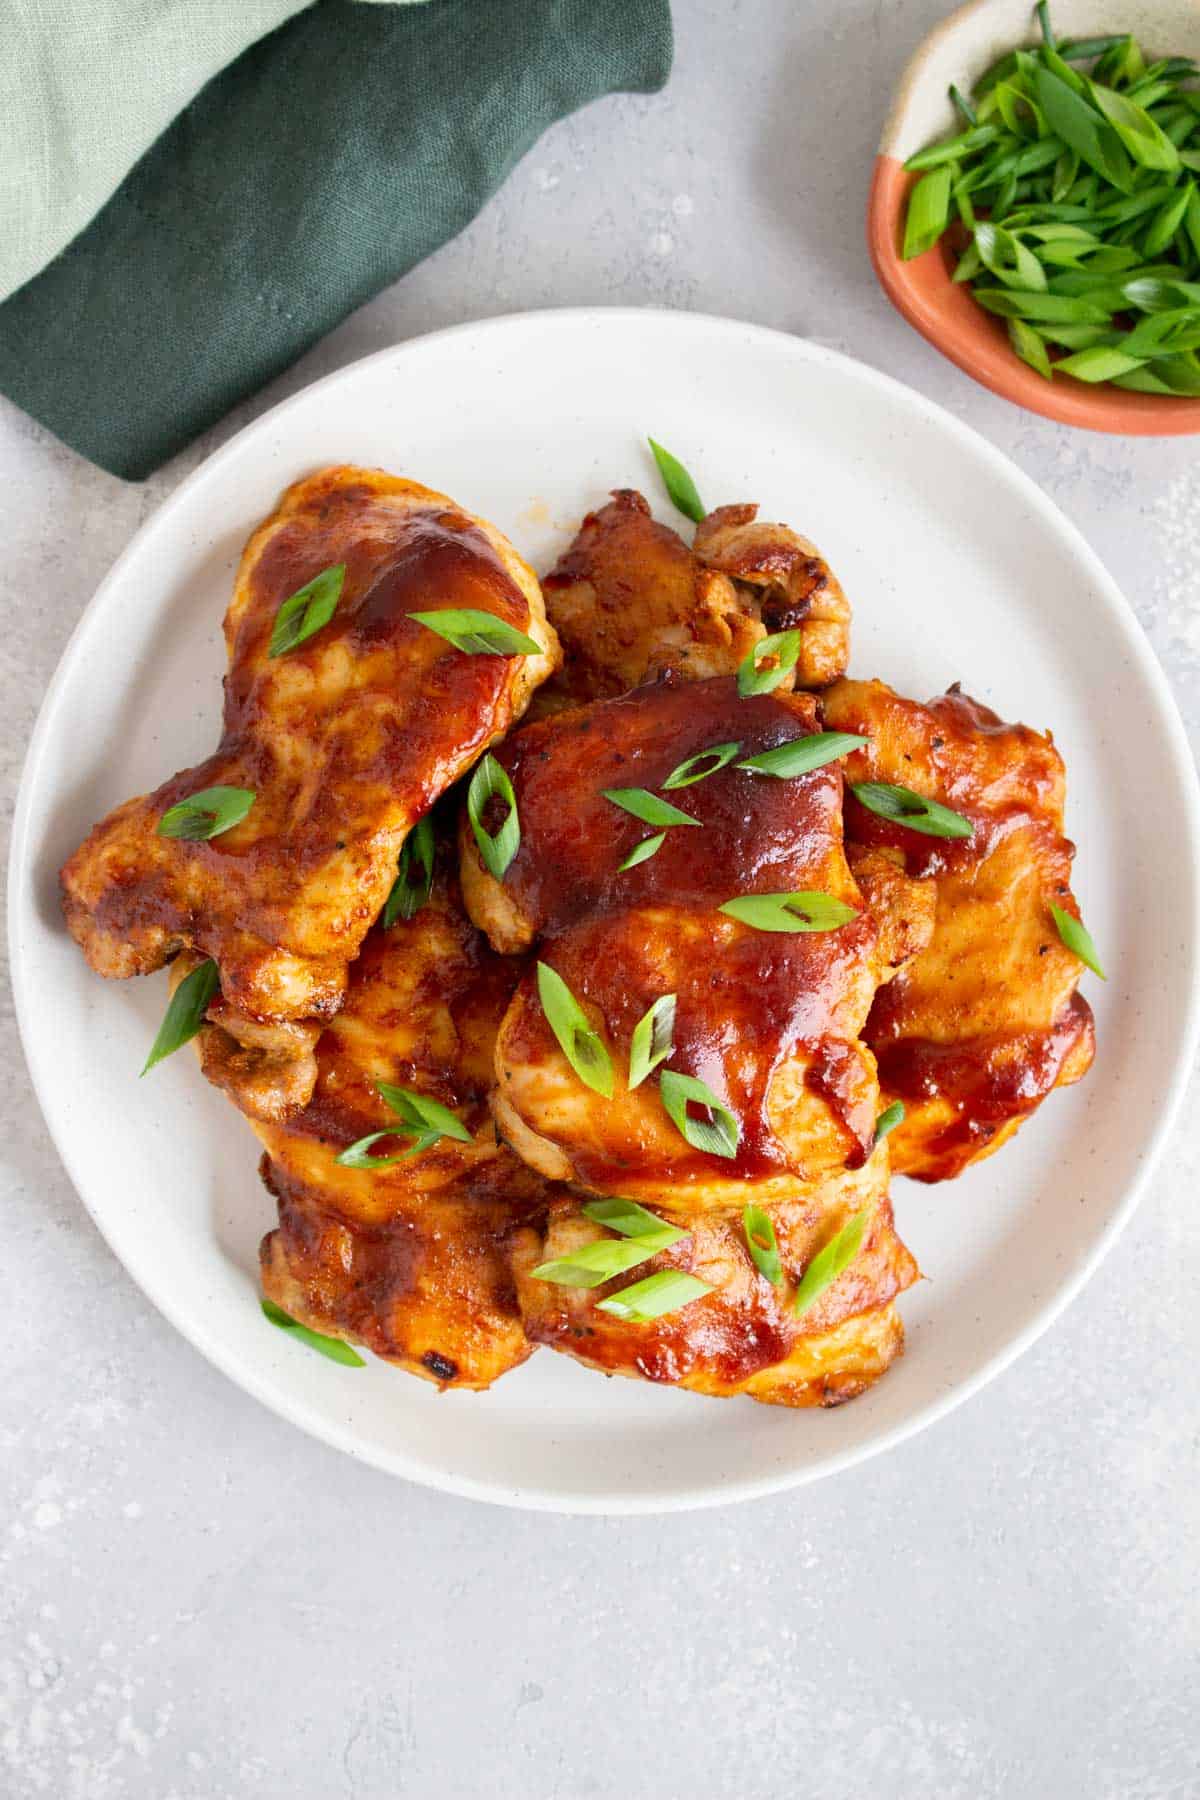 Overhead view of a plate of air fryer bbq chicken.